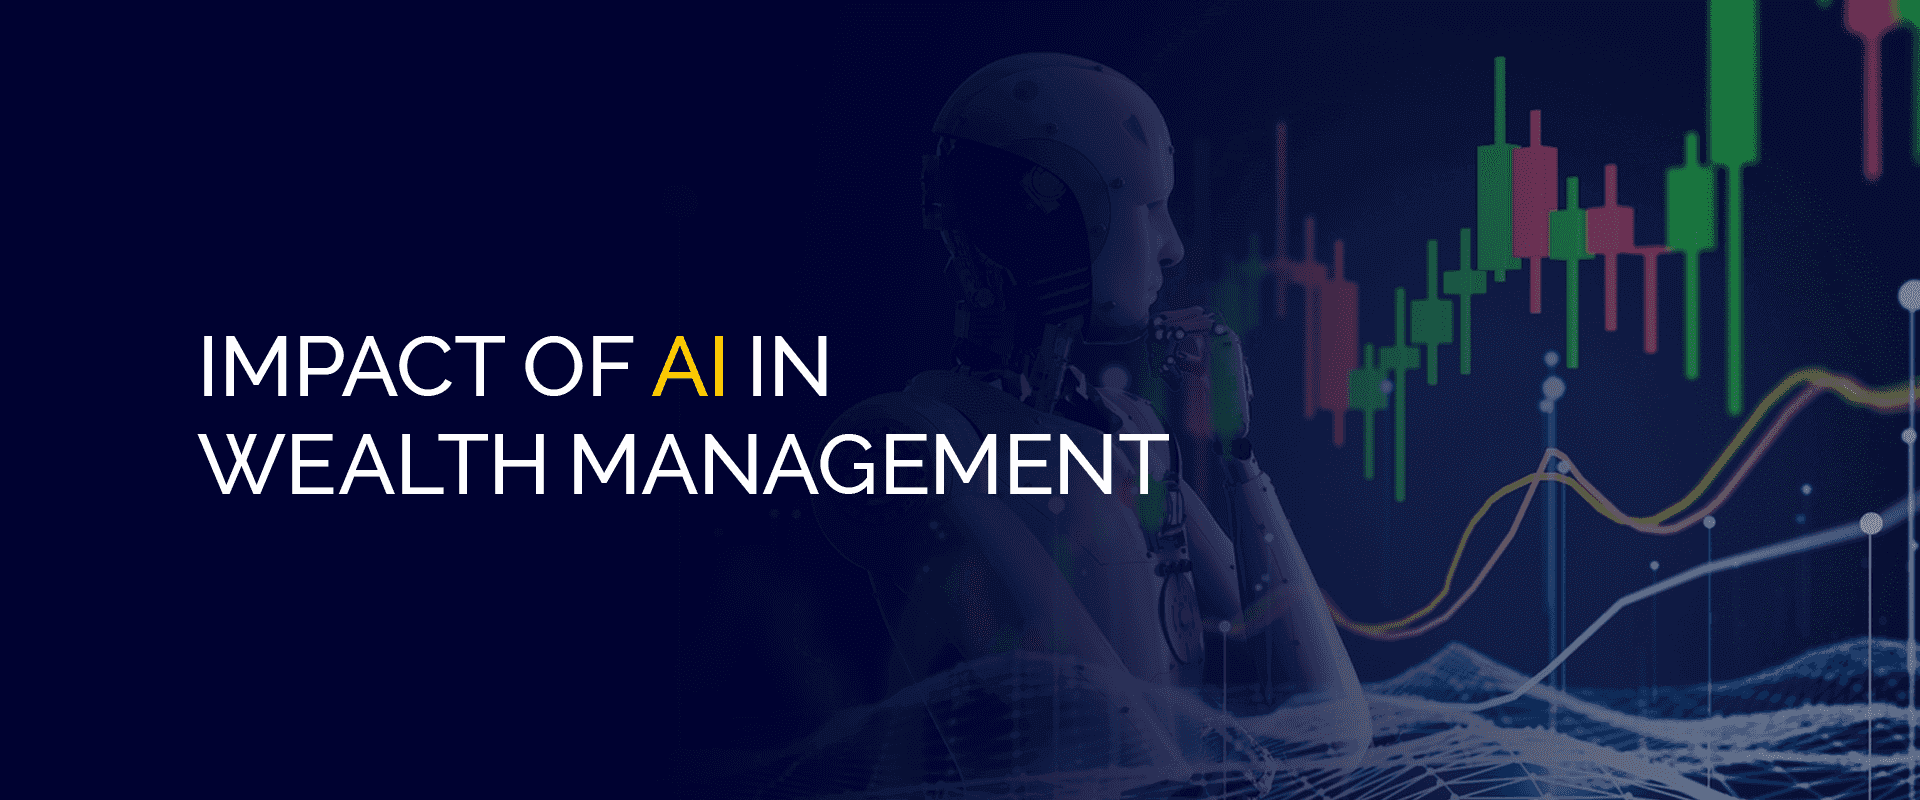 Impact of AI in Wealth Management